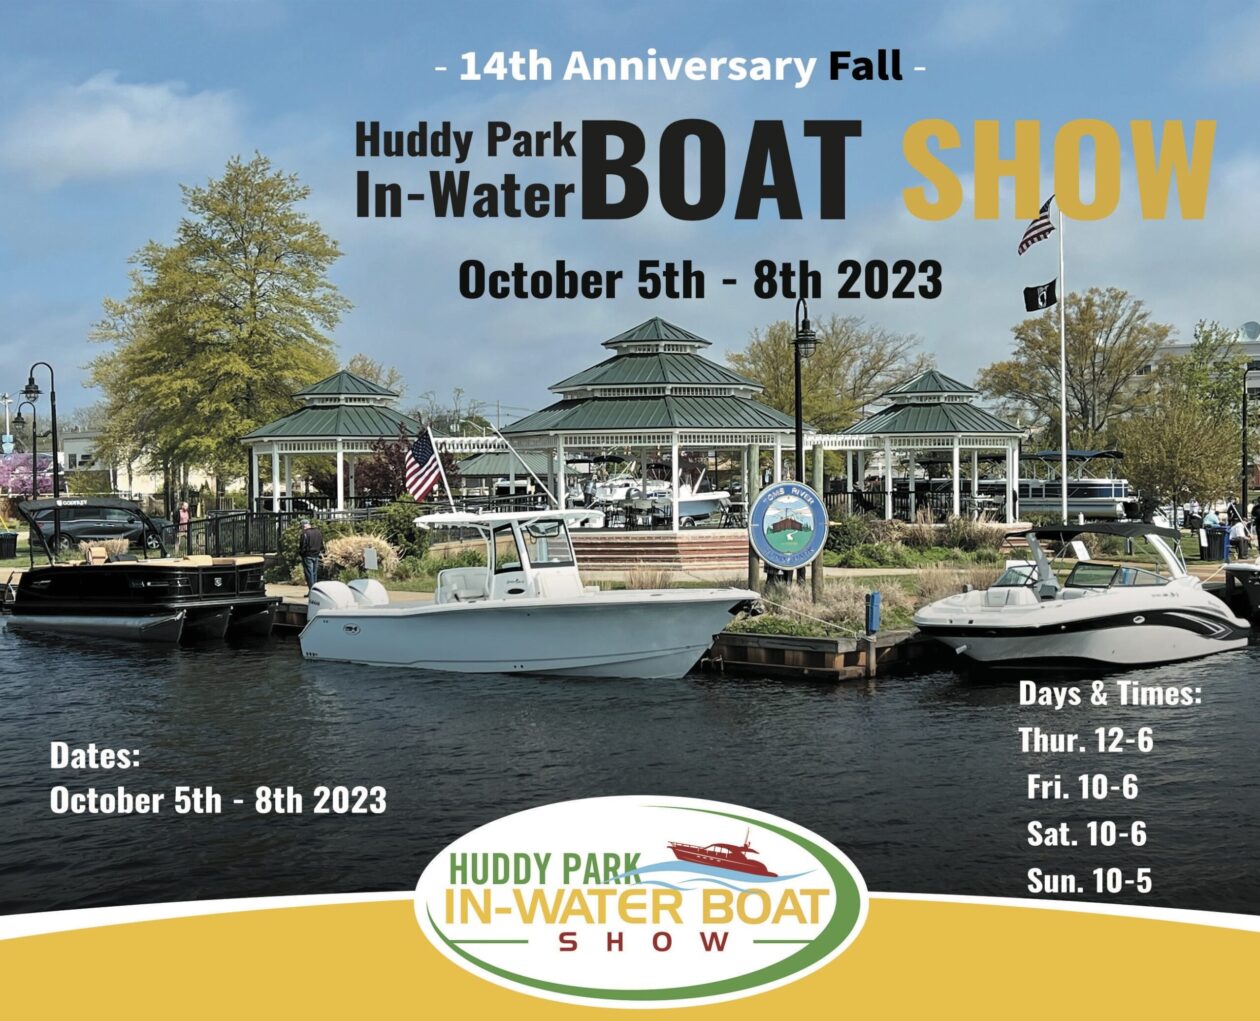 Huddy Park In-Water Boat Show